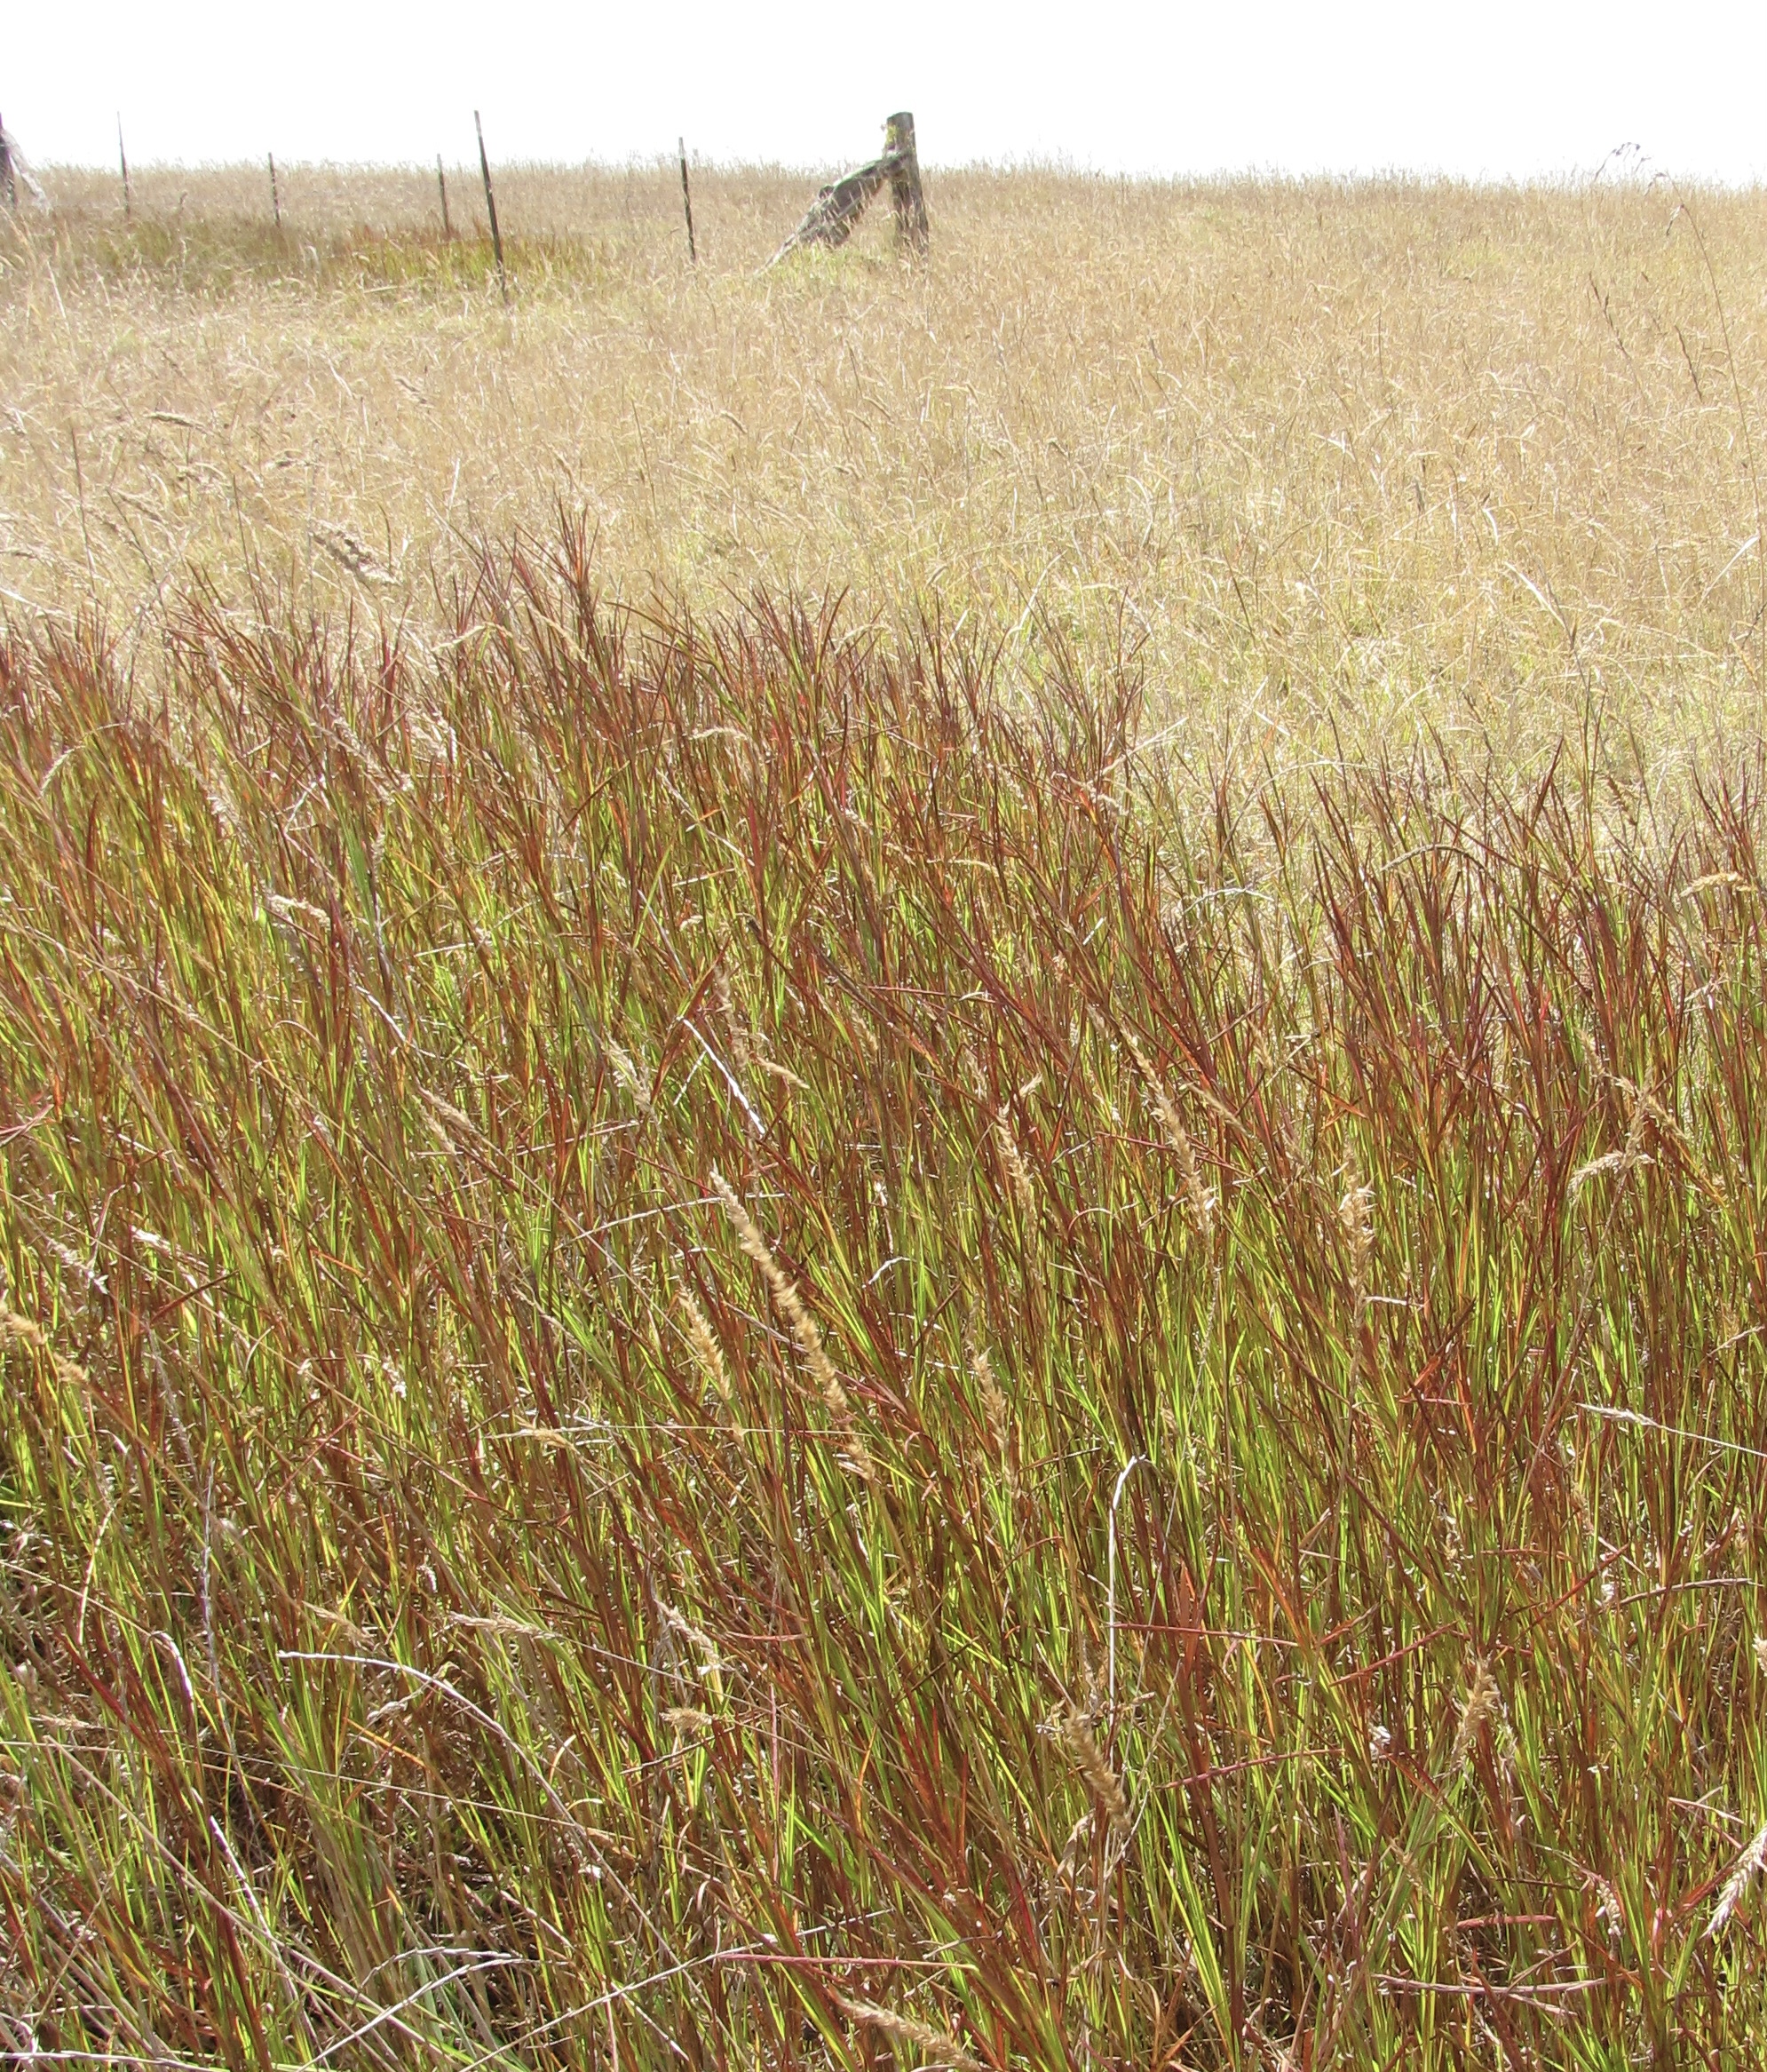 Photo showing limpo grass in a pasture in Maui, Hawaii. The foliage is green and the inflorescences are red.